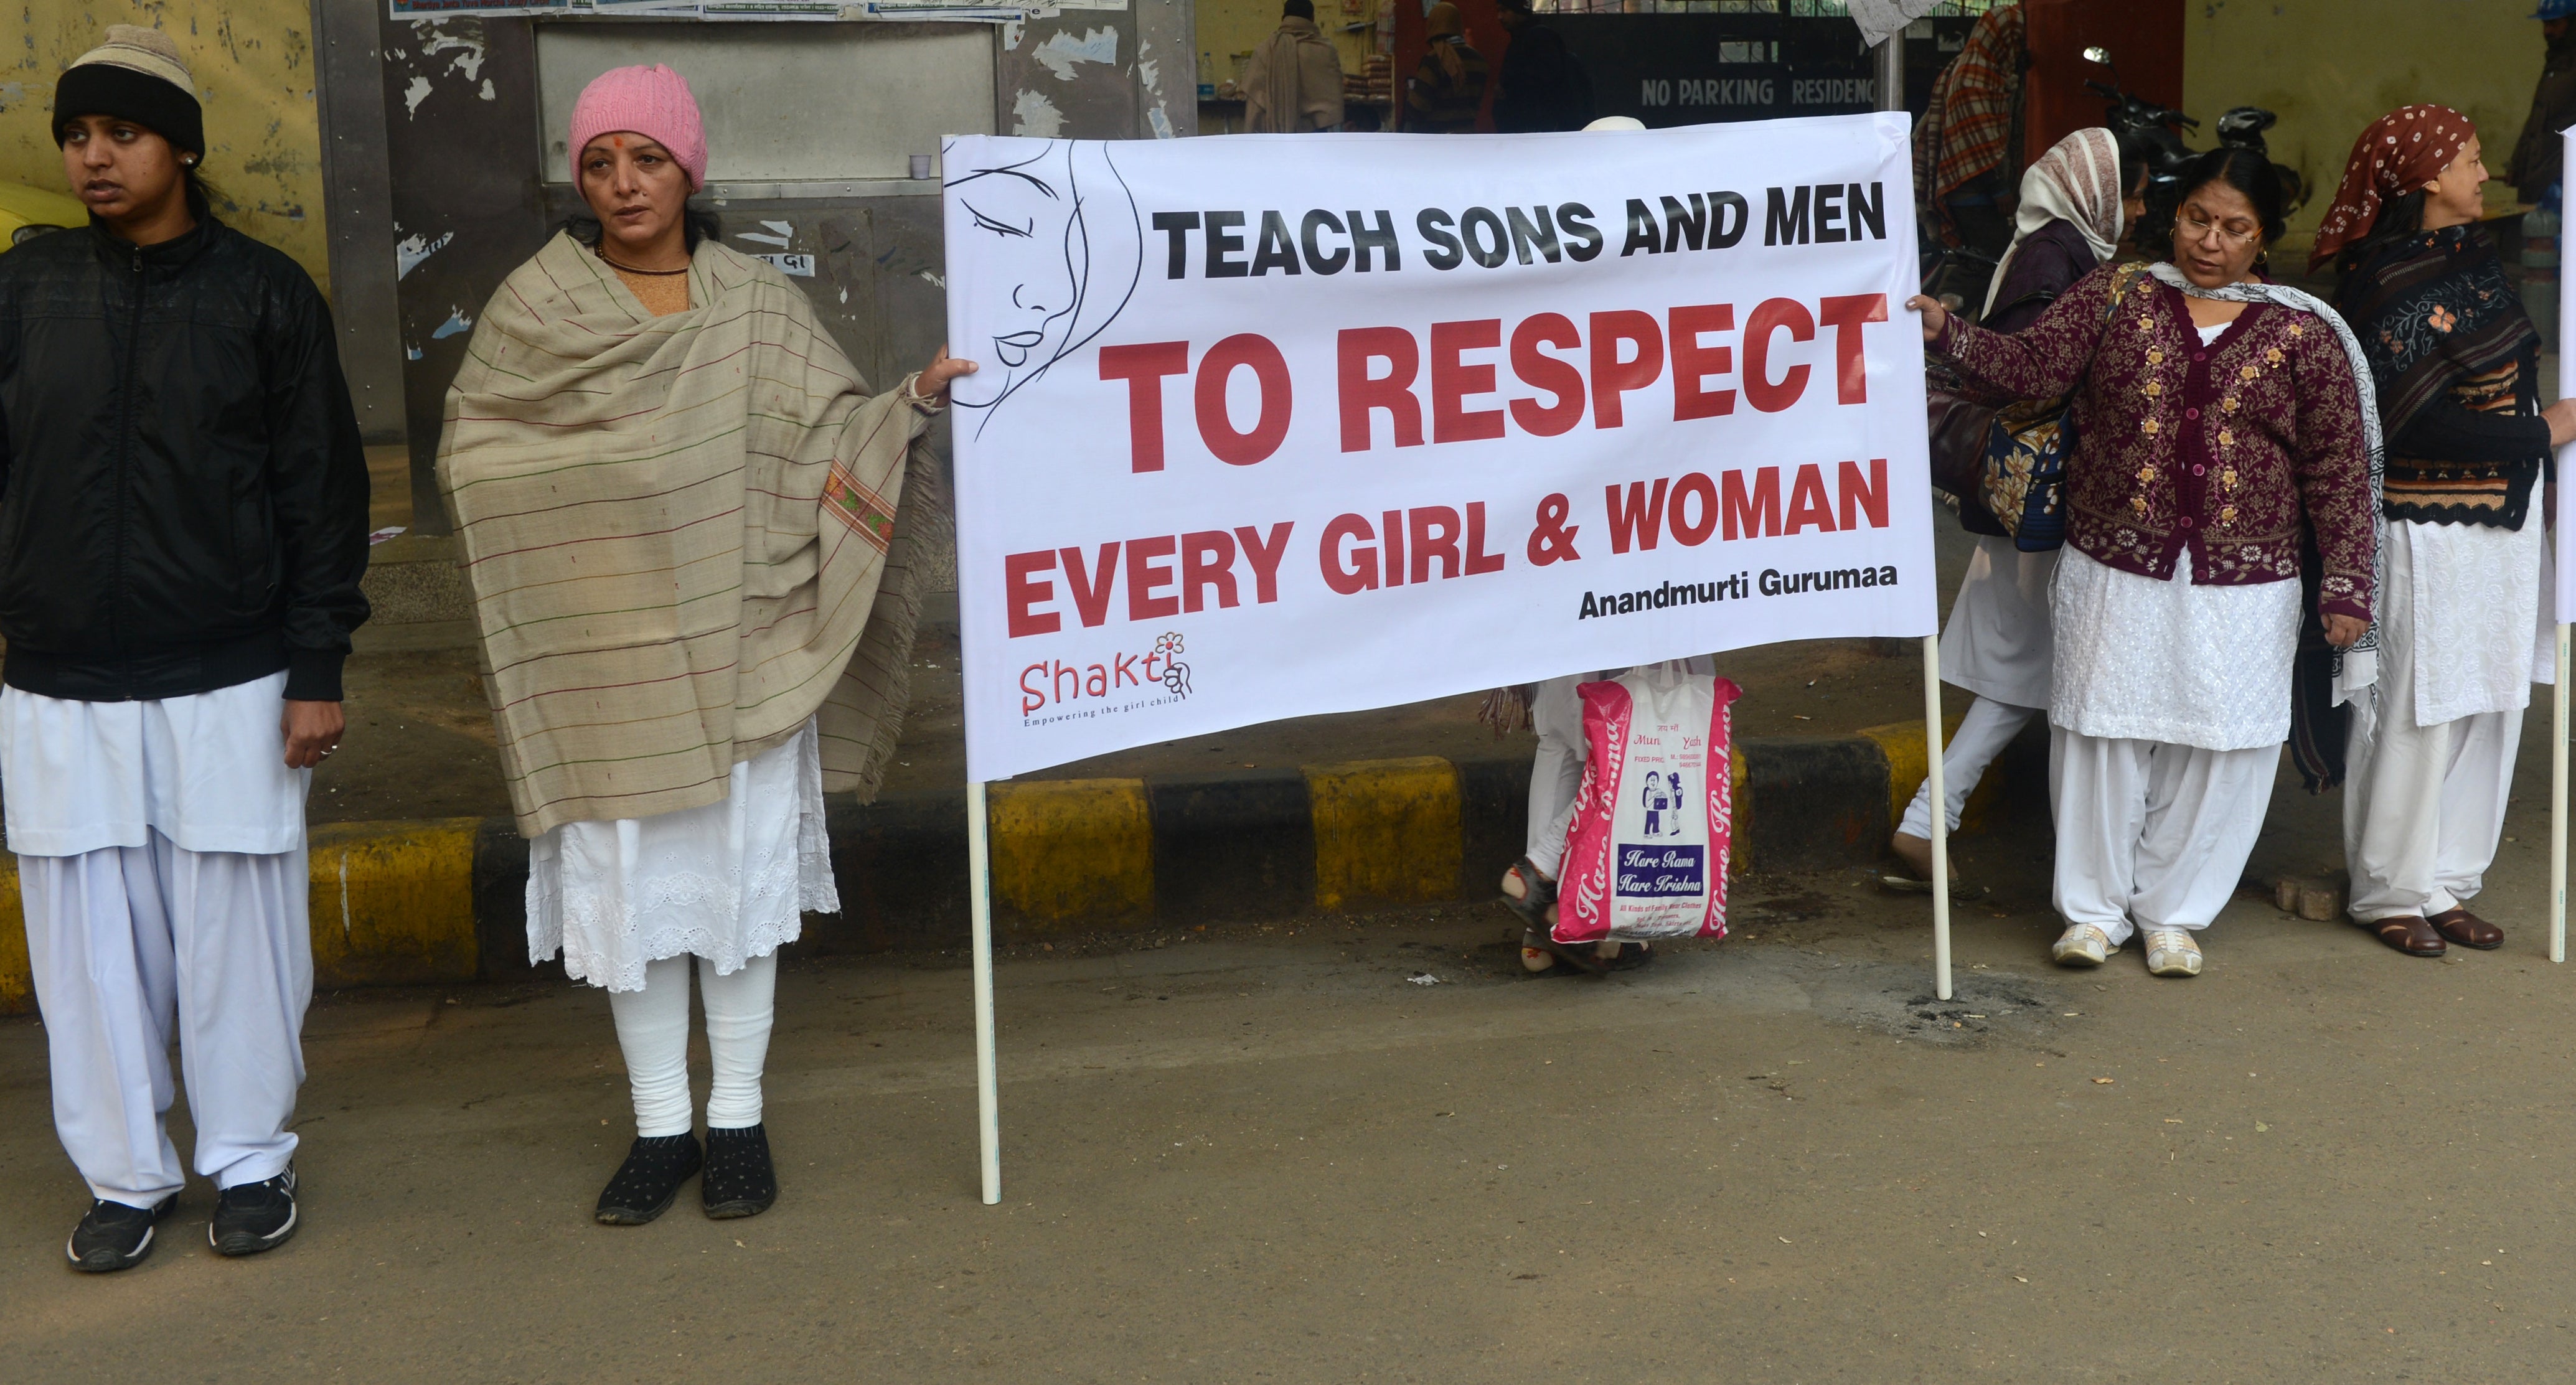 File photo of Indian residents gathering to protest violence against women in New Delhi on 1 January